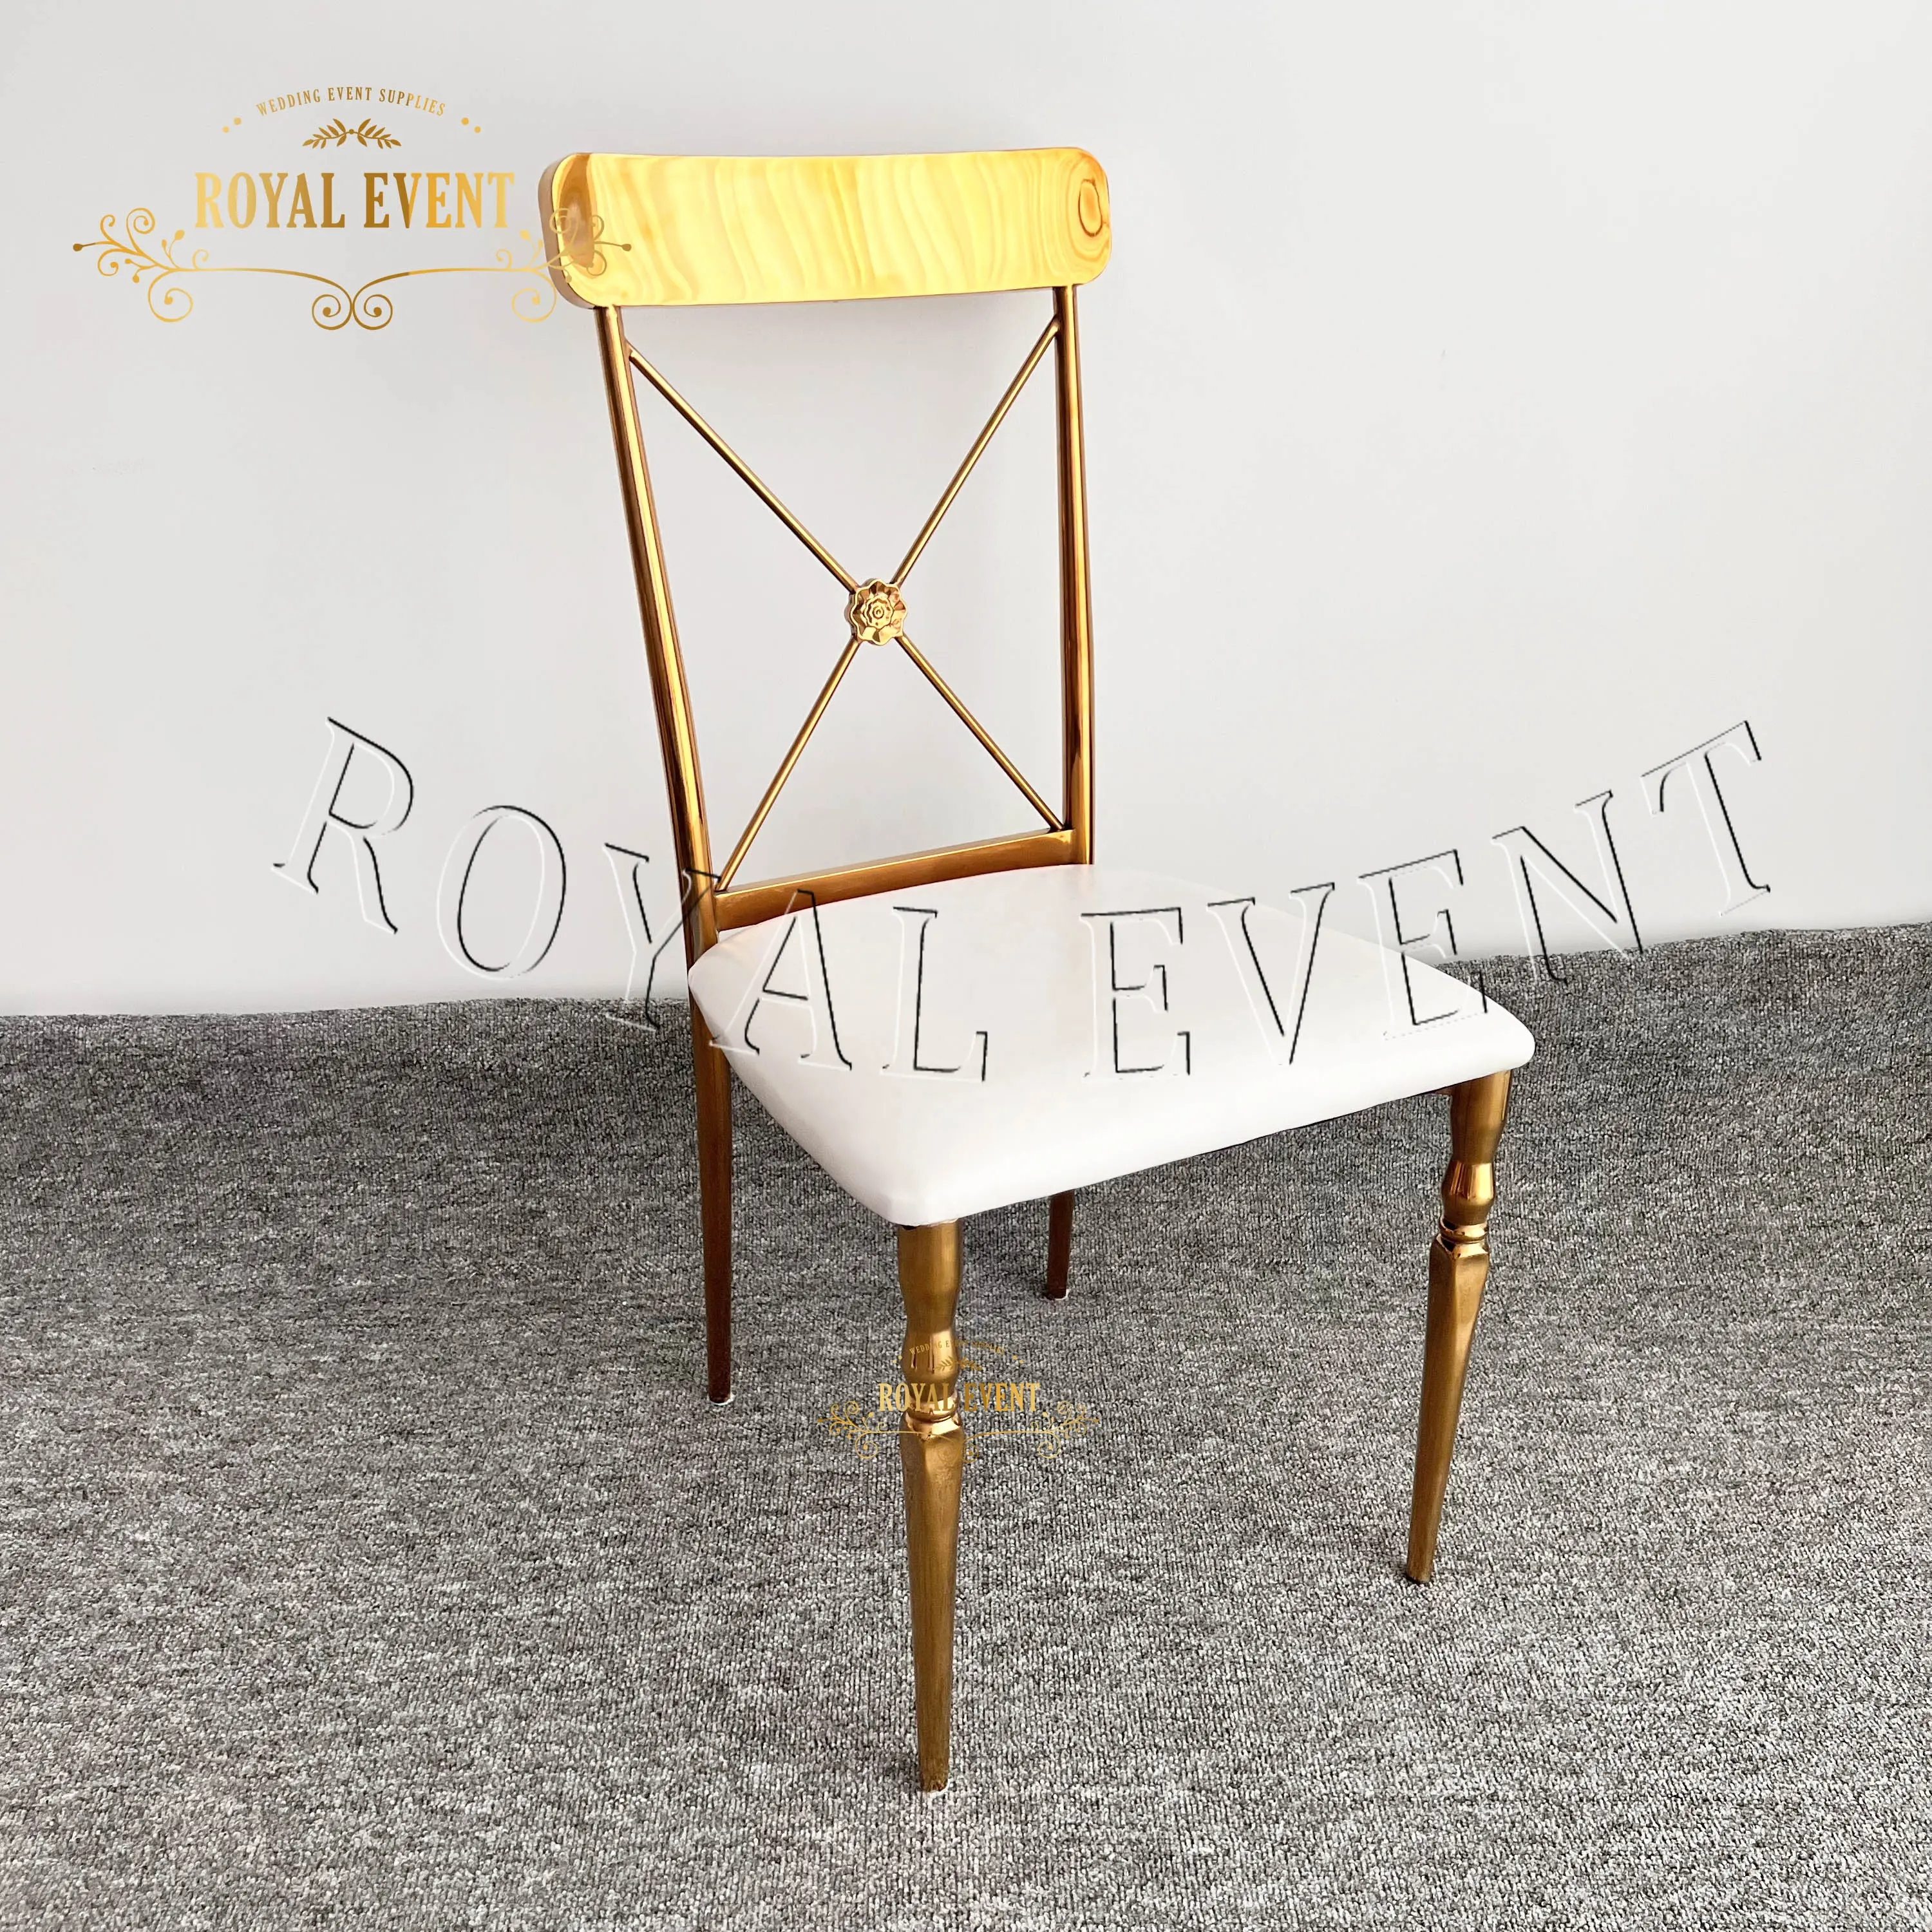 Creative Elegant Stainless Steel Banquet Chairs Gold Wedding Chair For Wedding Furniture Events Decoration